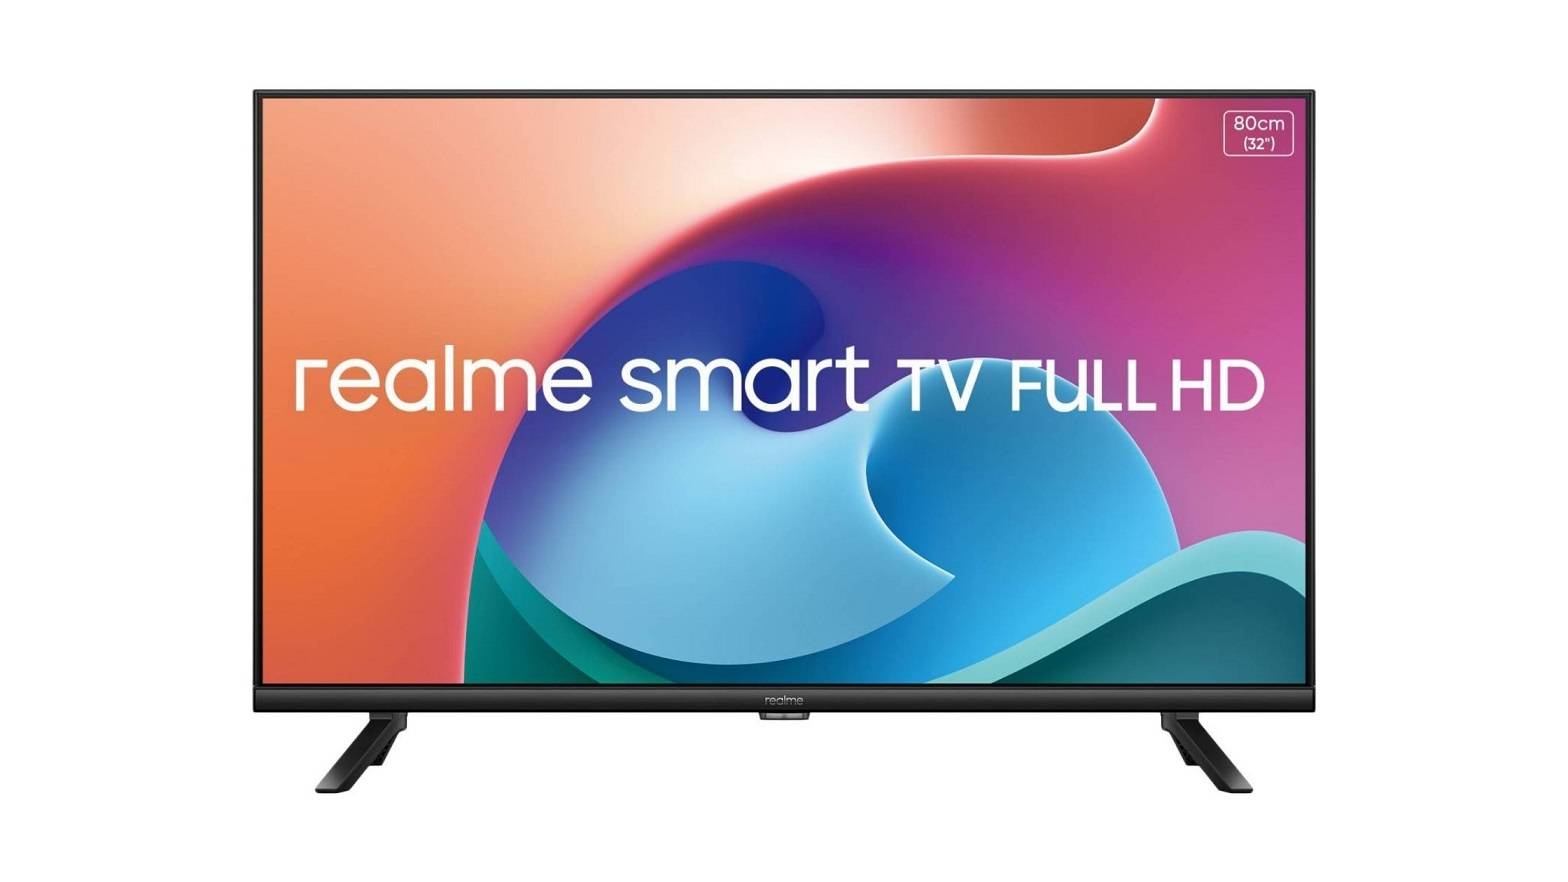 Realme Smart TV Full HD 32-inch Launched in India Full Features